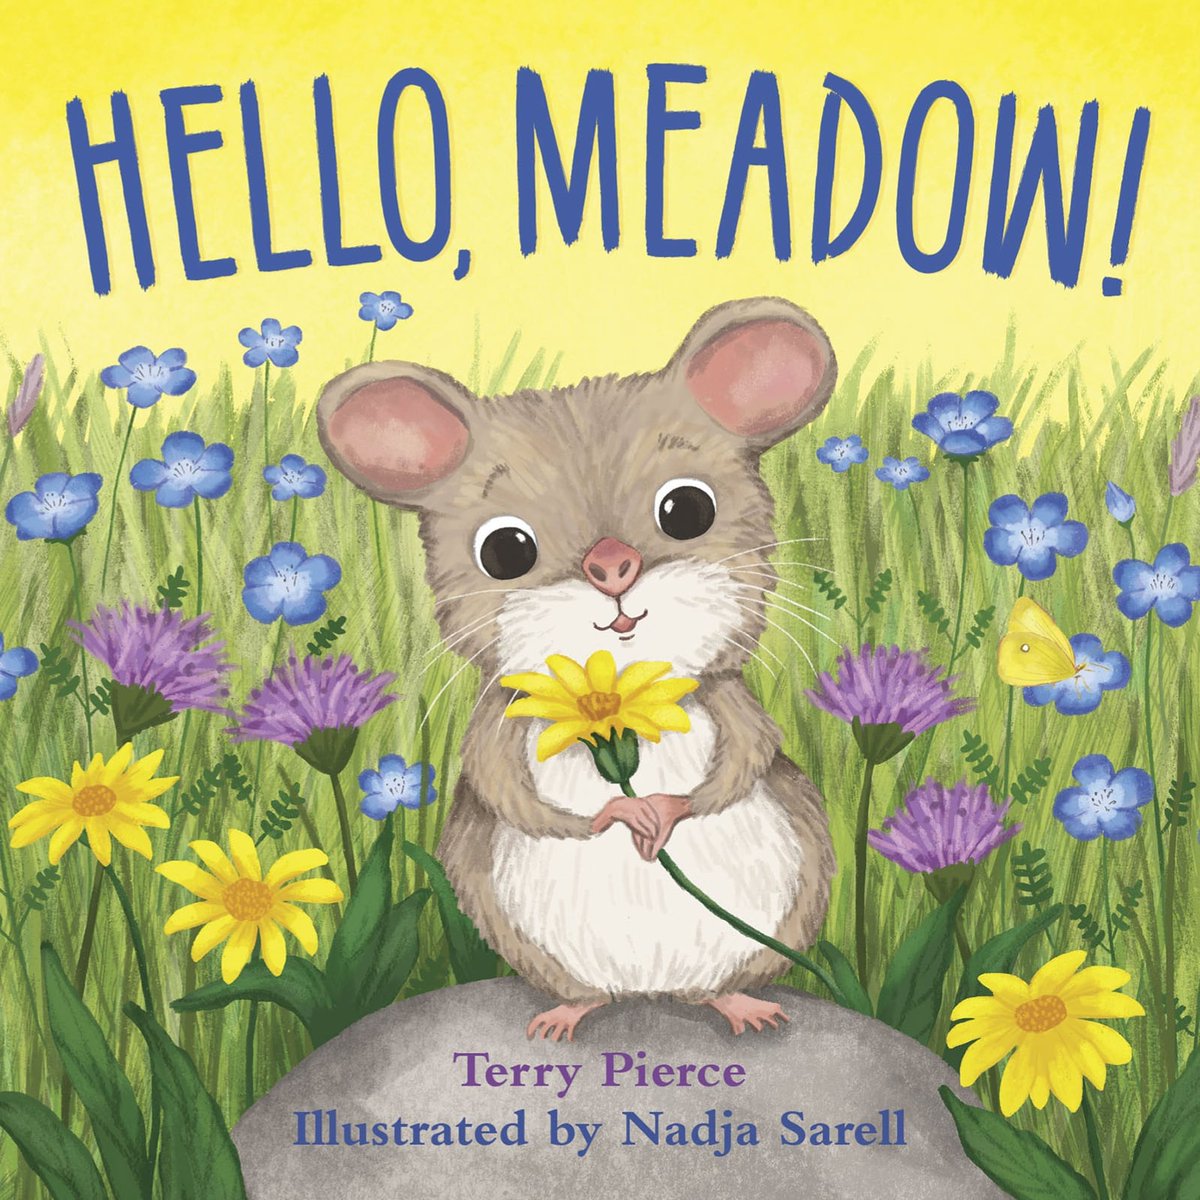 CORRECTION: Book giveaway ends tonight, MAY 20 midnight.🤦‍♀️My apologies! HELLO, MEADOW! #bookgiveaway! Do each of these things to have your name entered: 🐭Follow me 🦋Retweet 🌻Comment or tag a friend US only. #boardbook #librarians #educators #kidlit